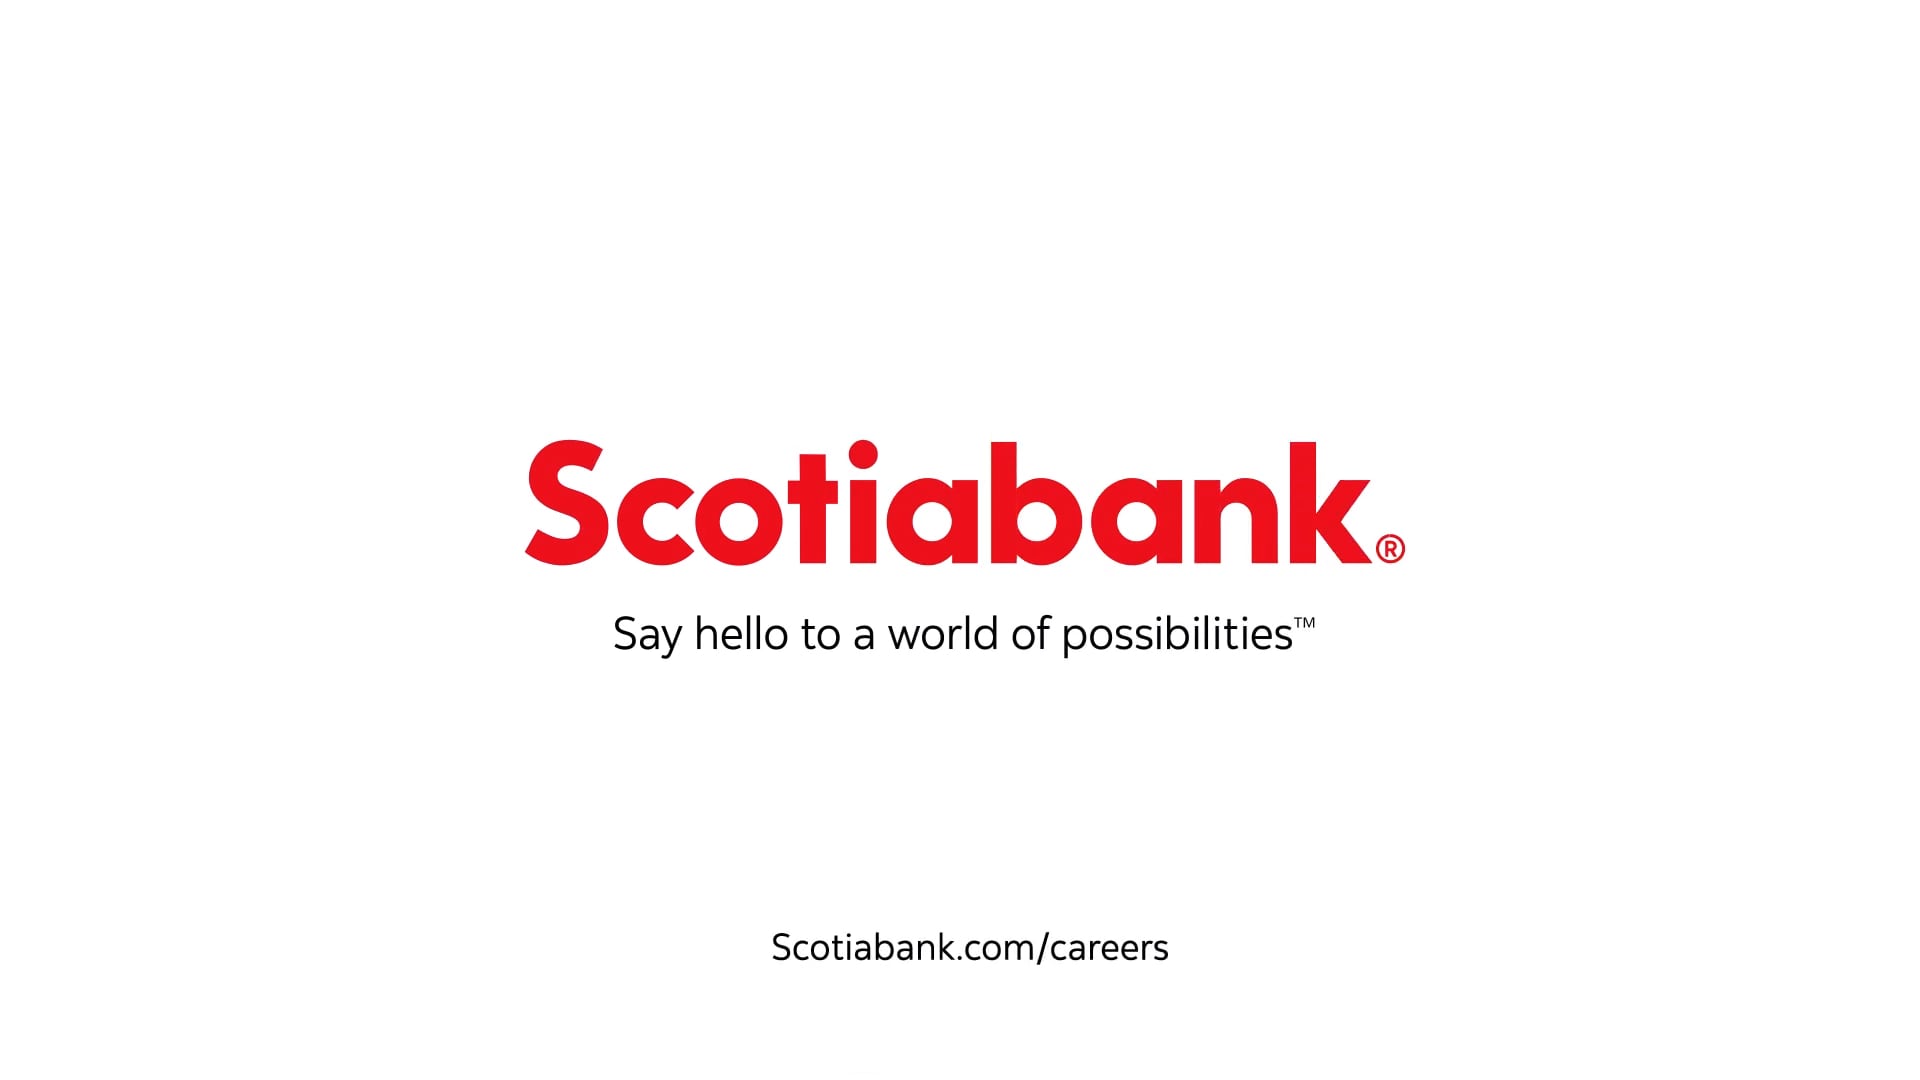 Scotiabank: Say hello to a world of possibilities.